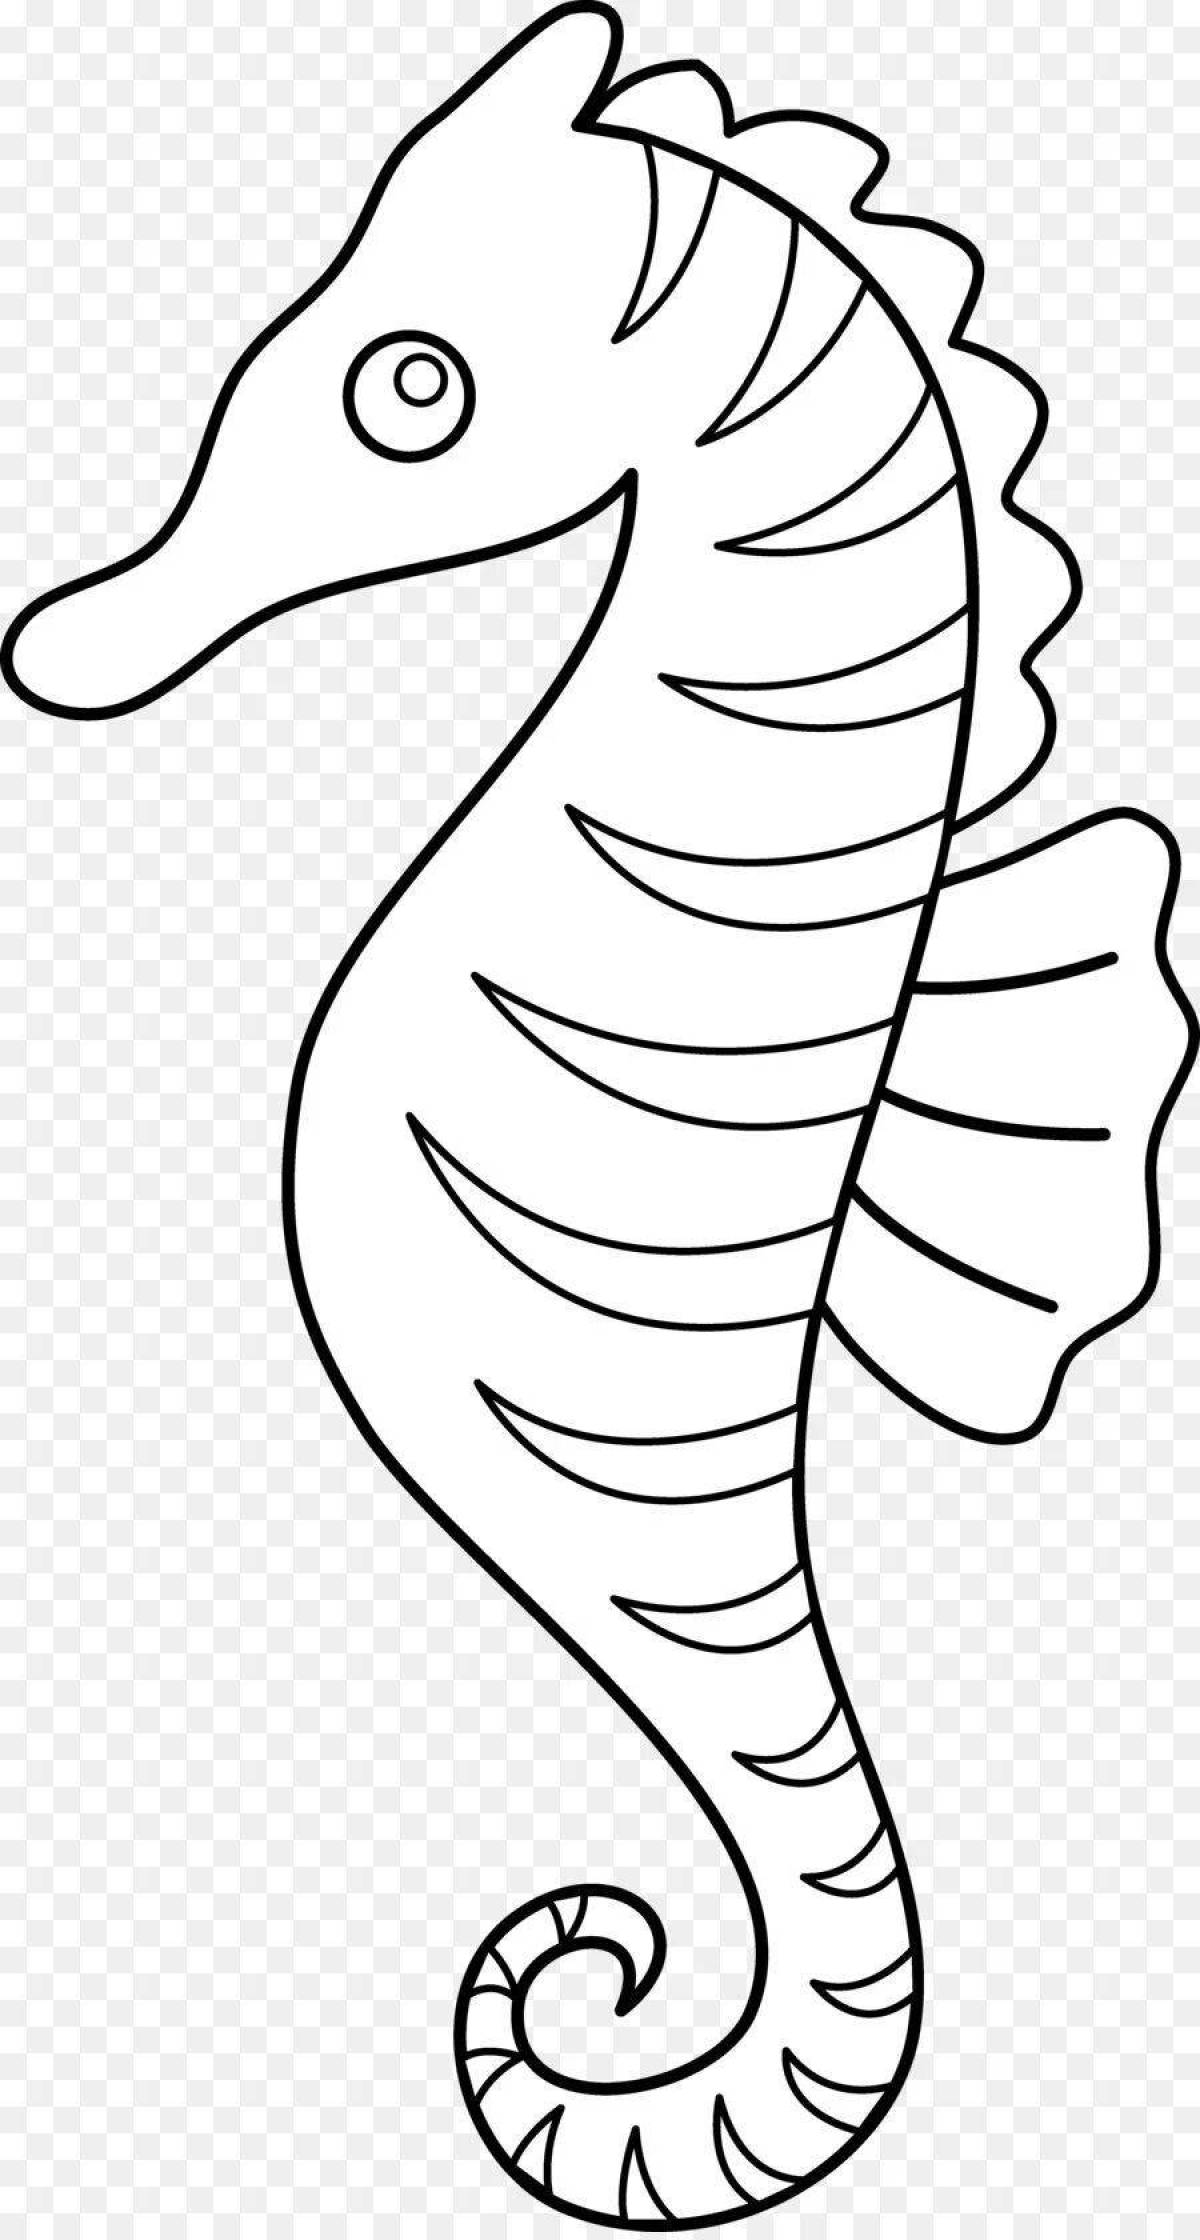 Amazing seahorse coloring pages for kids